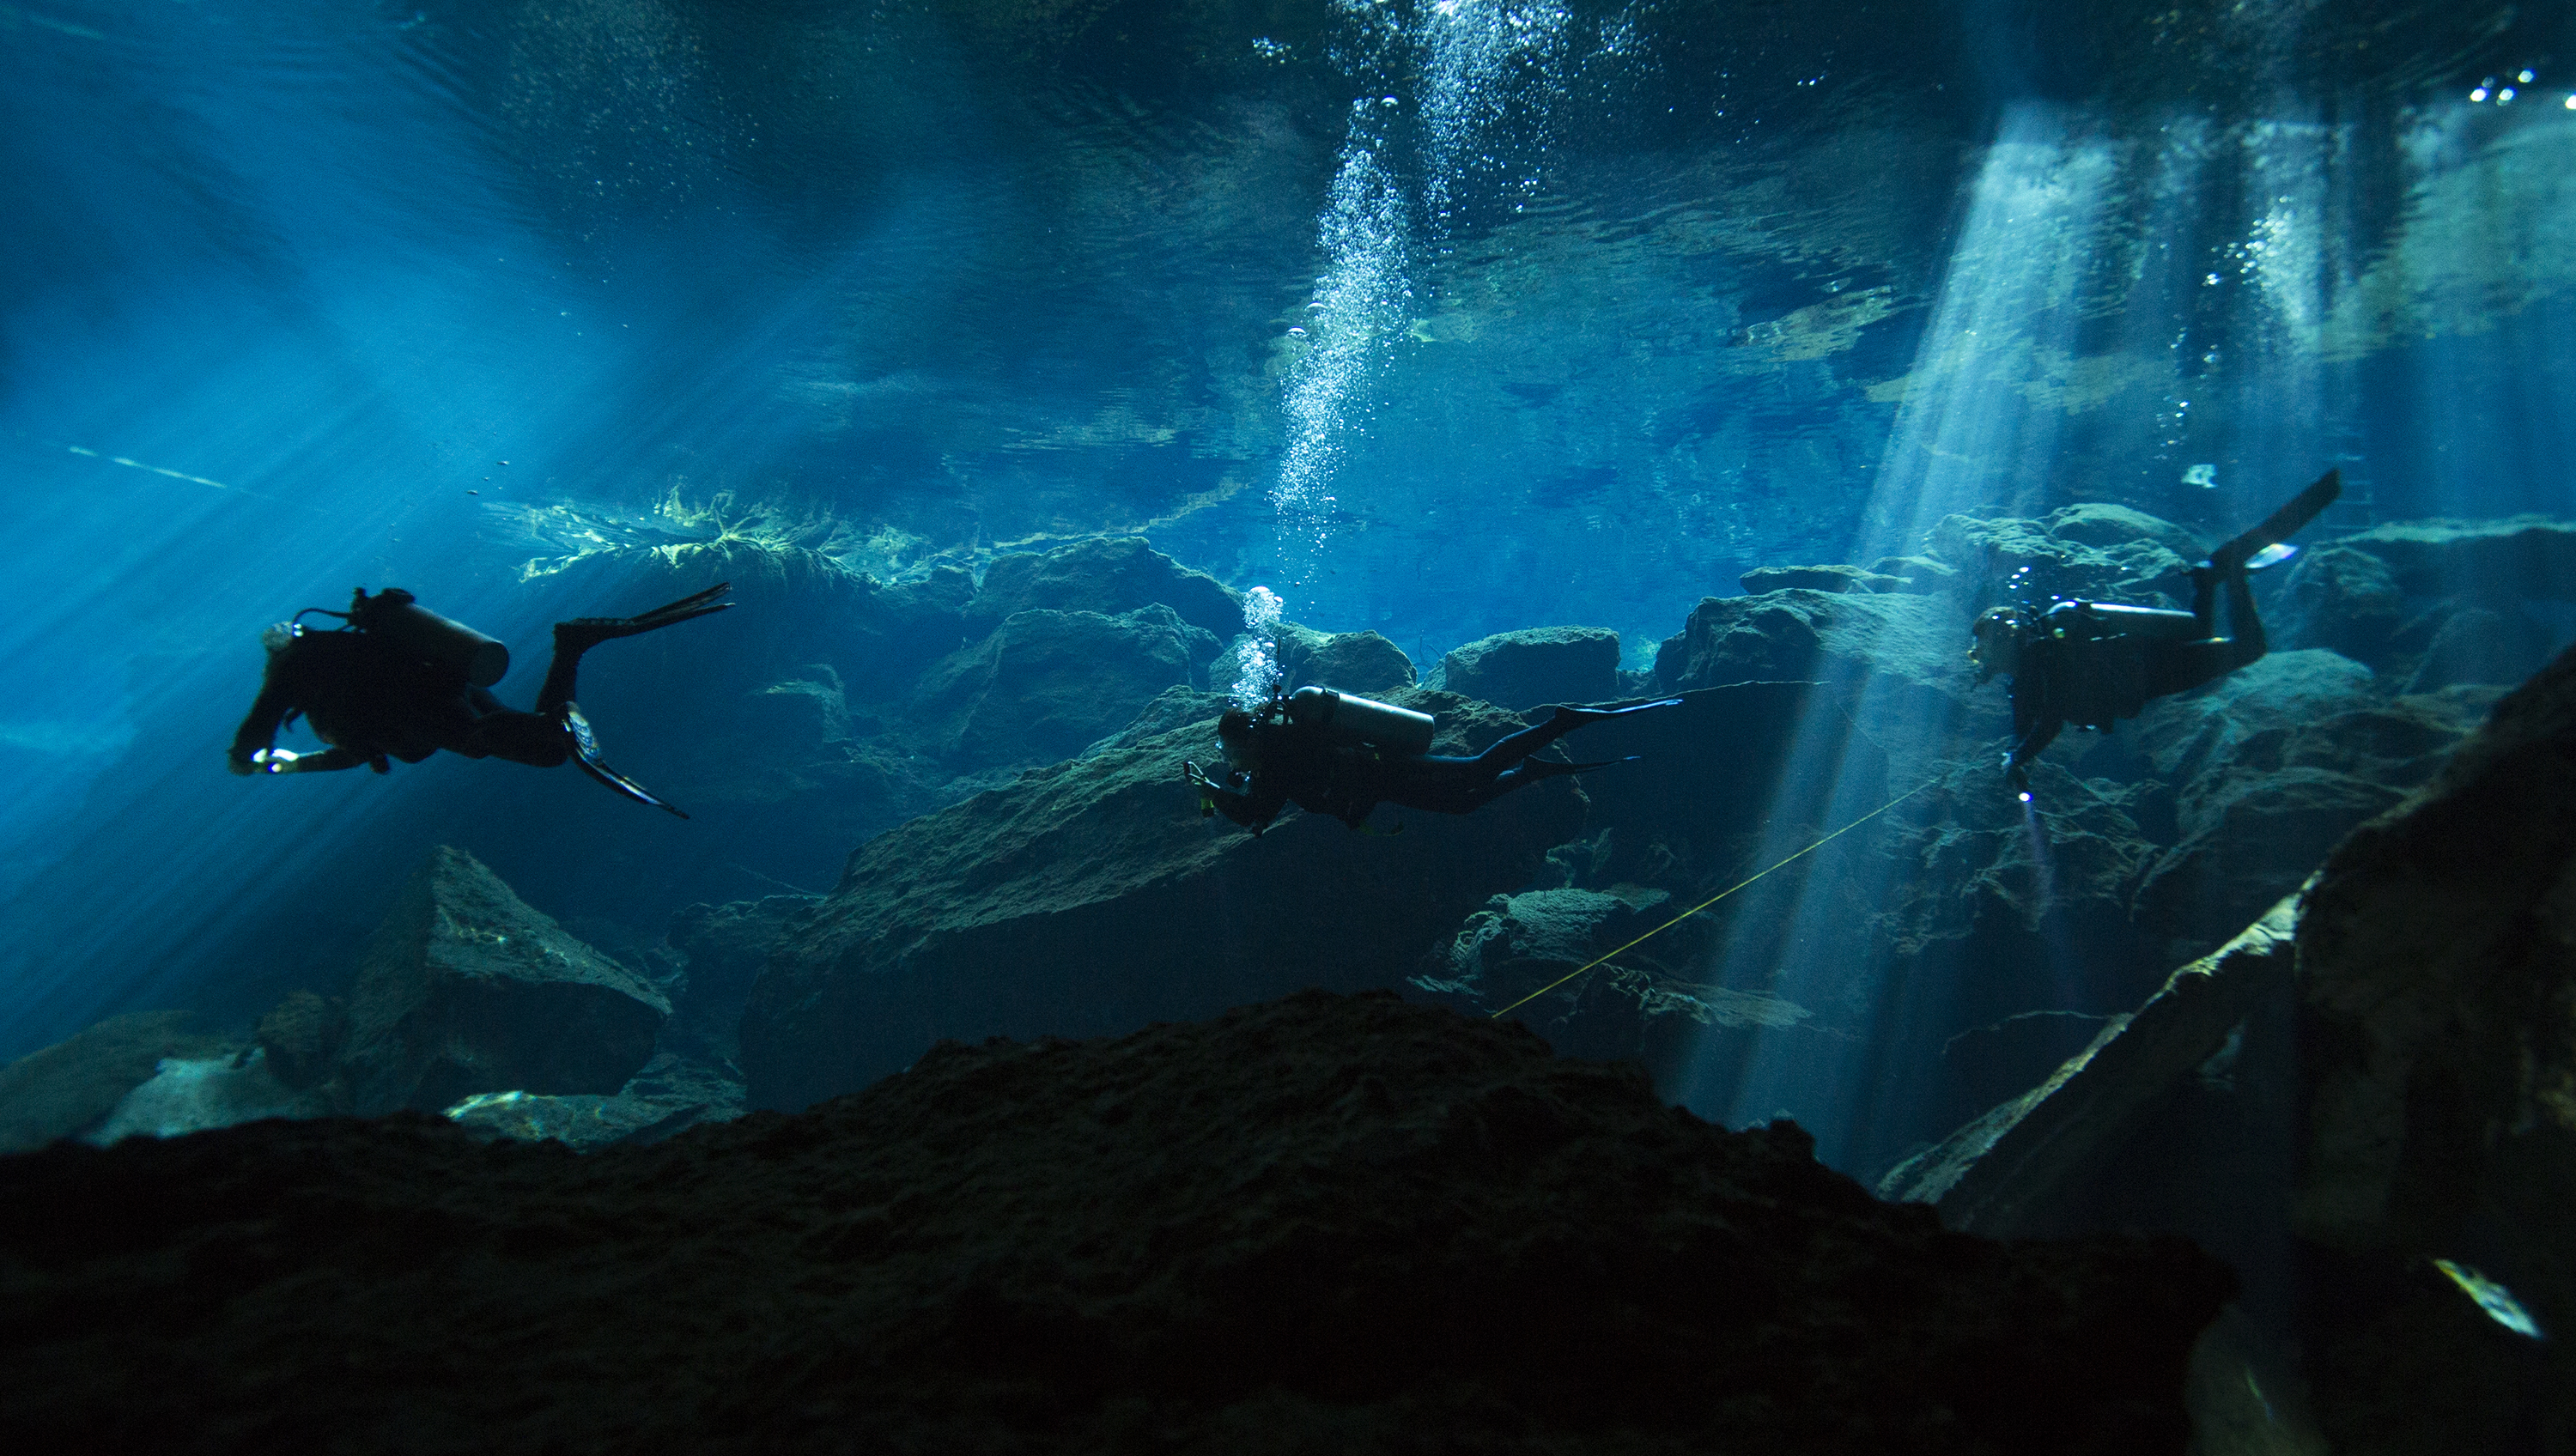 Three divers enter Hermano Pequeno cenote at Chauc Mool, on Jan. 11, 2017, in Quintana Roo, MX.  Cenotes are sinkholes made from collapsed limestone and filled with water, which contain caverns and well as caves.